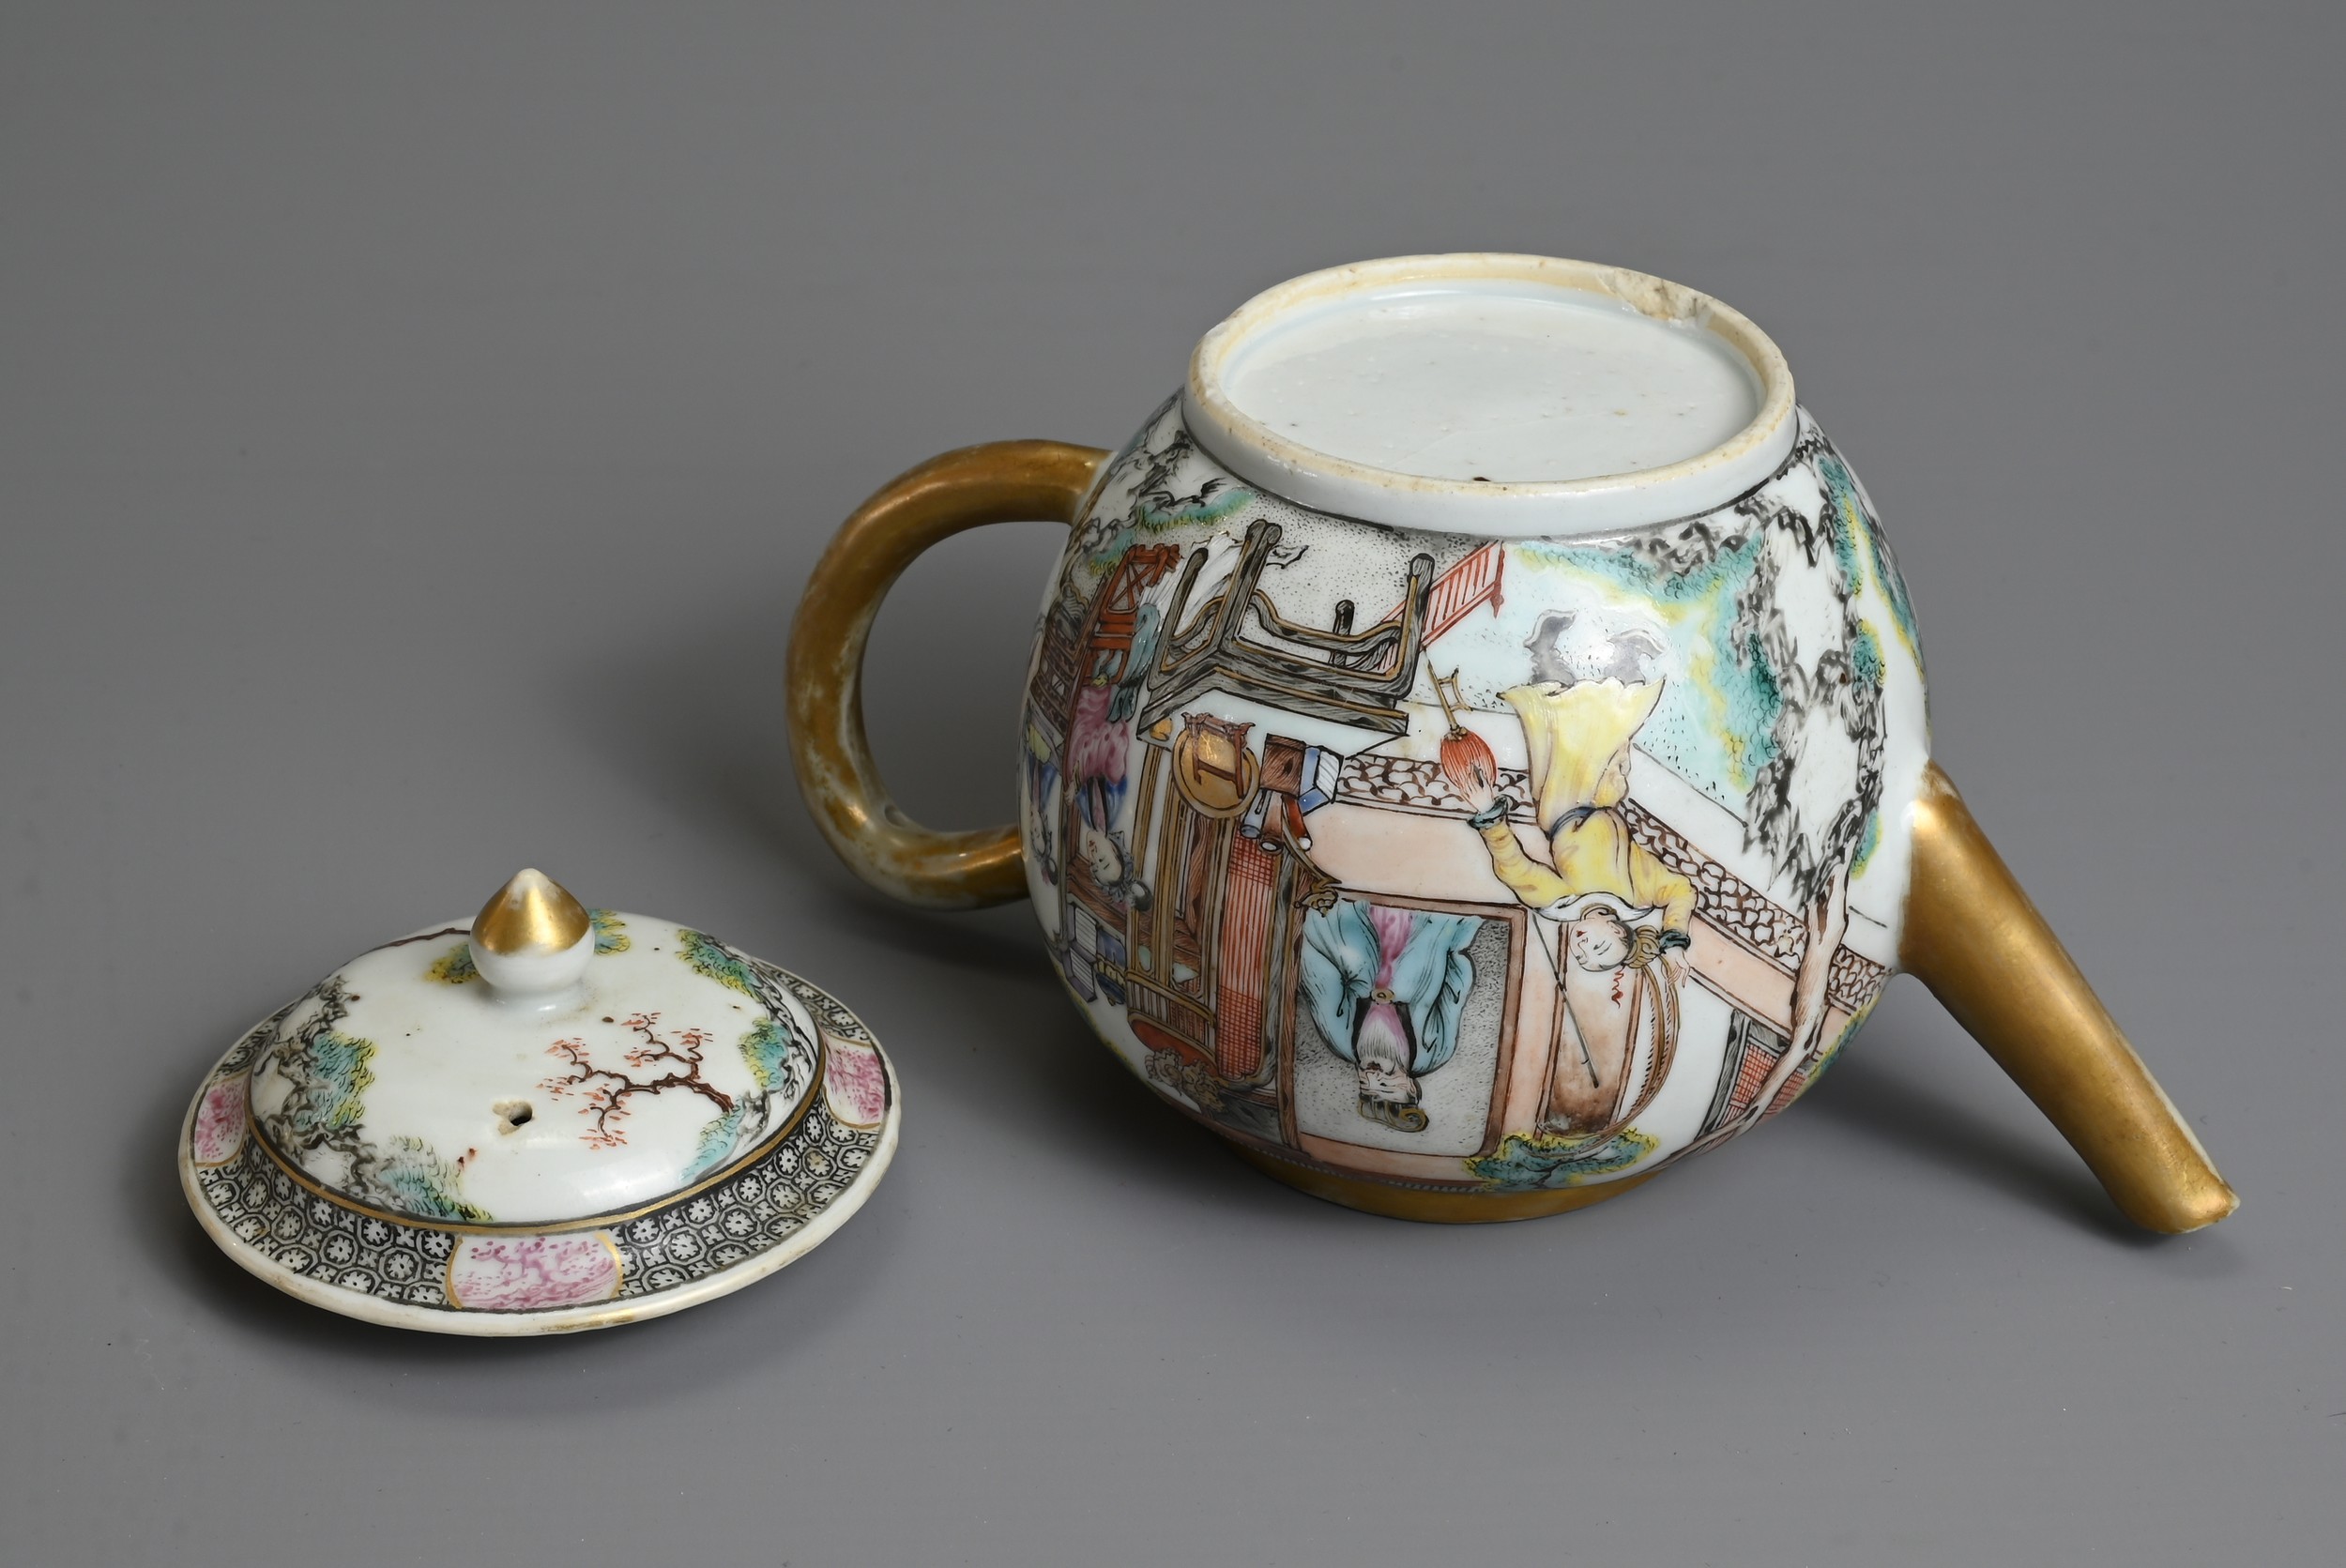 A FINE CHINESE FAMILLE ROSE PORCELAIN TEAPOT, 18TH CENTURY - Image 6 of 21